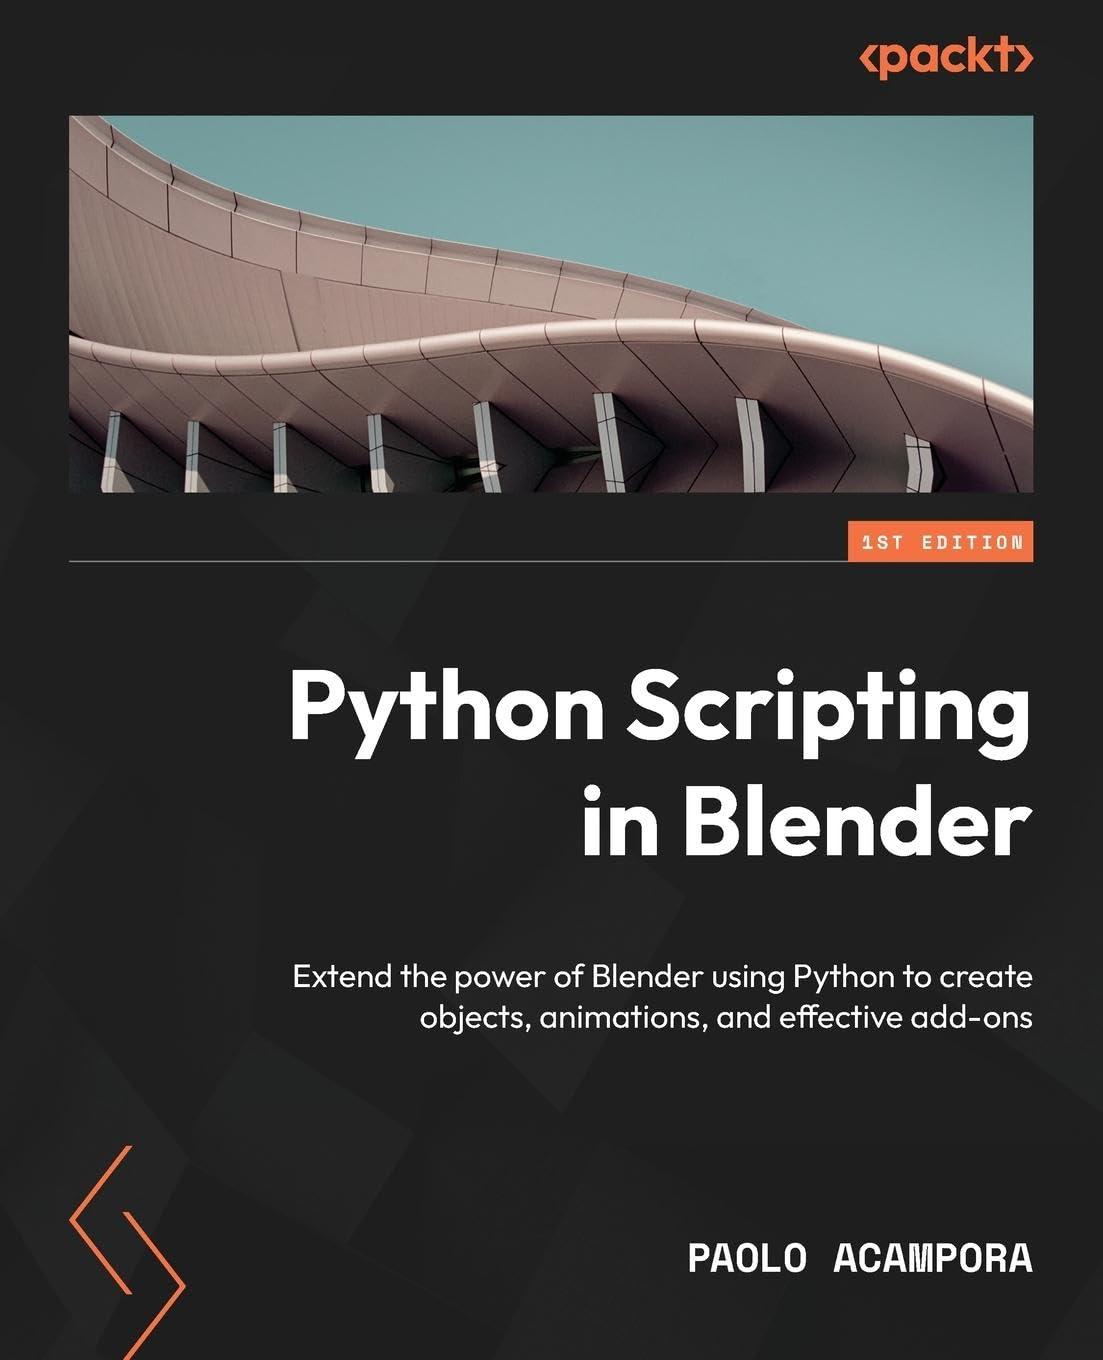 Python Scripting In Blender Extend The Power Of Blender Using Python To Create Objects Animations And Effective Add Ons